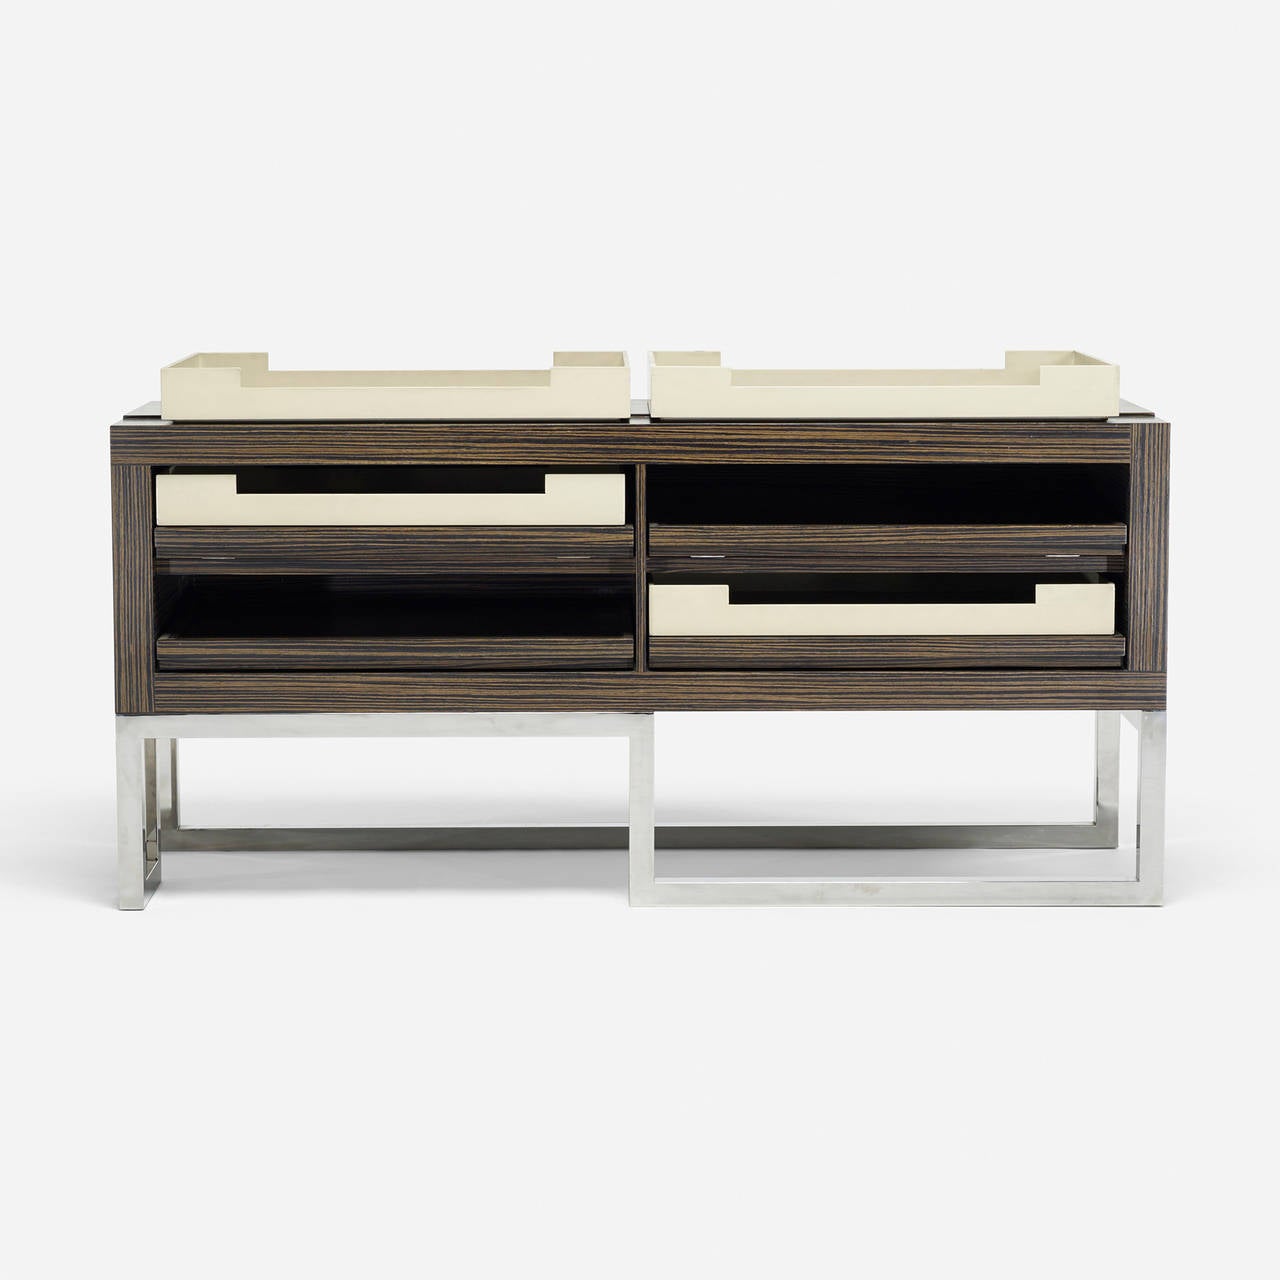 American Cabinet for Gucci by Studio Sofield Inc.